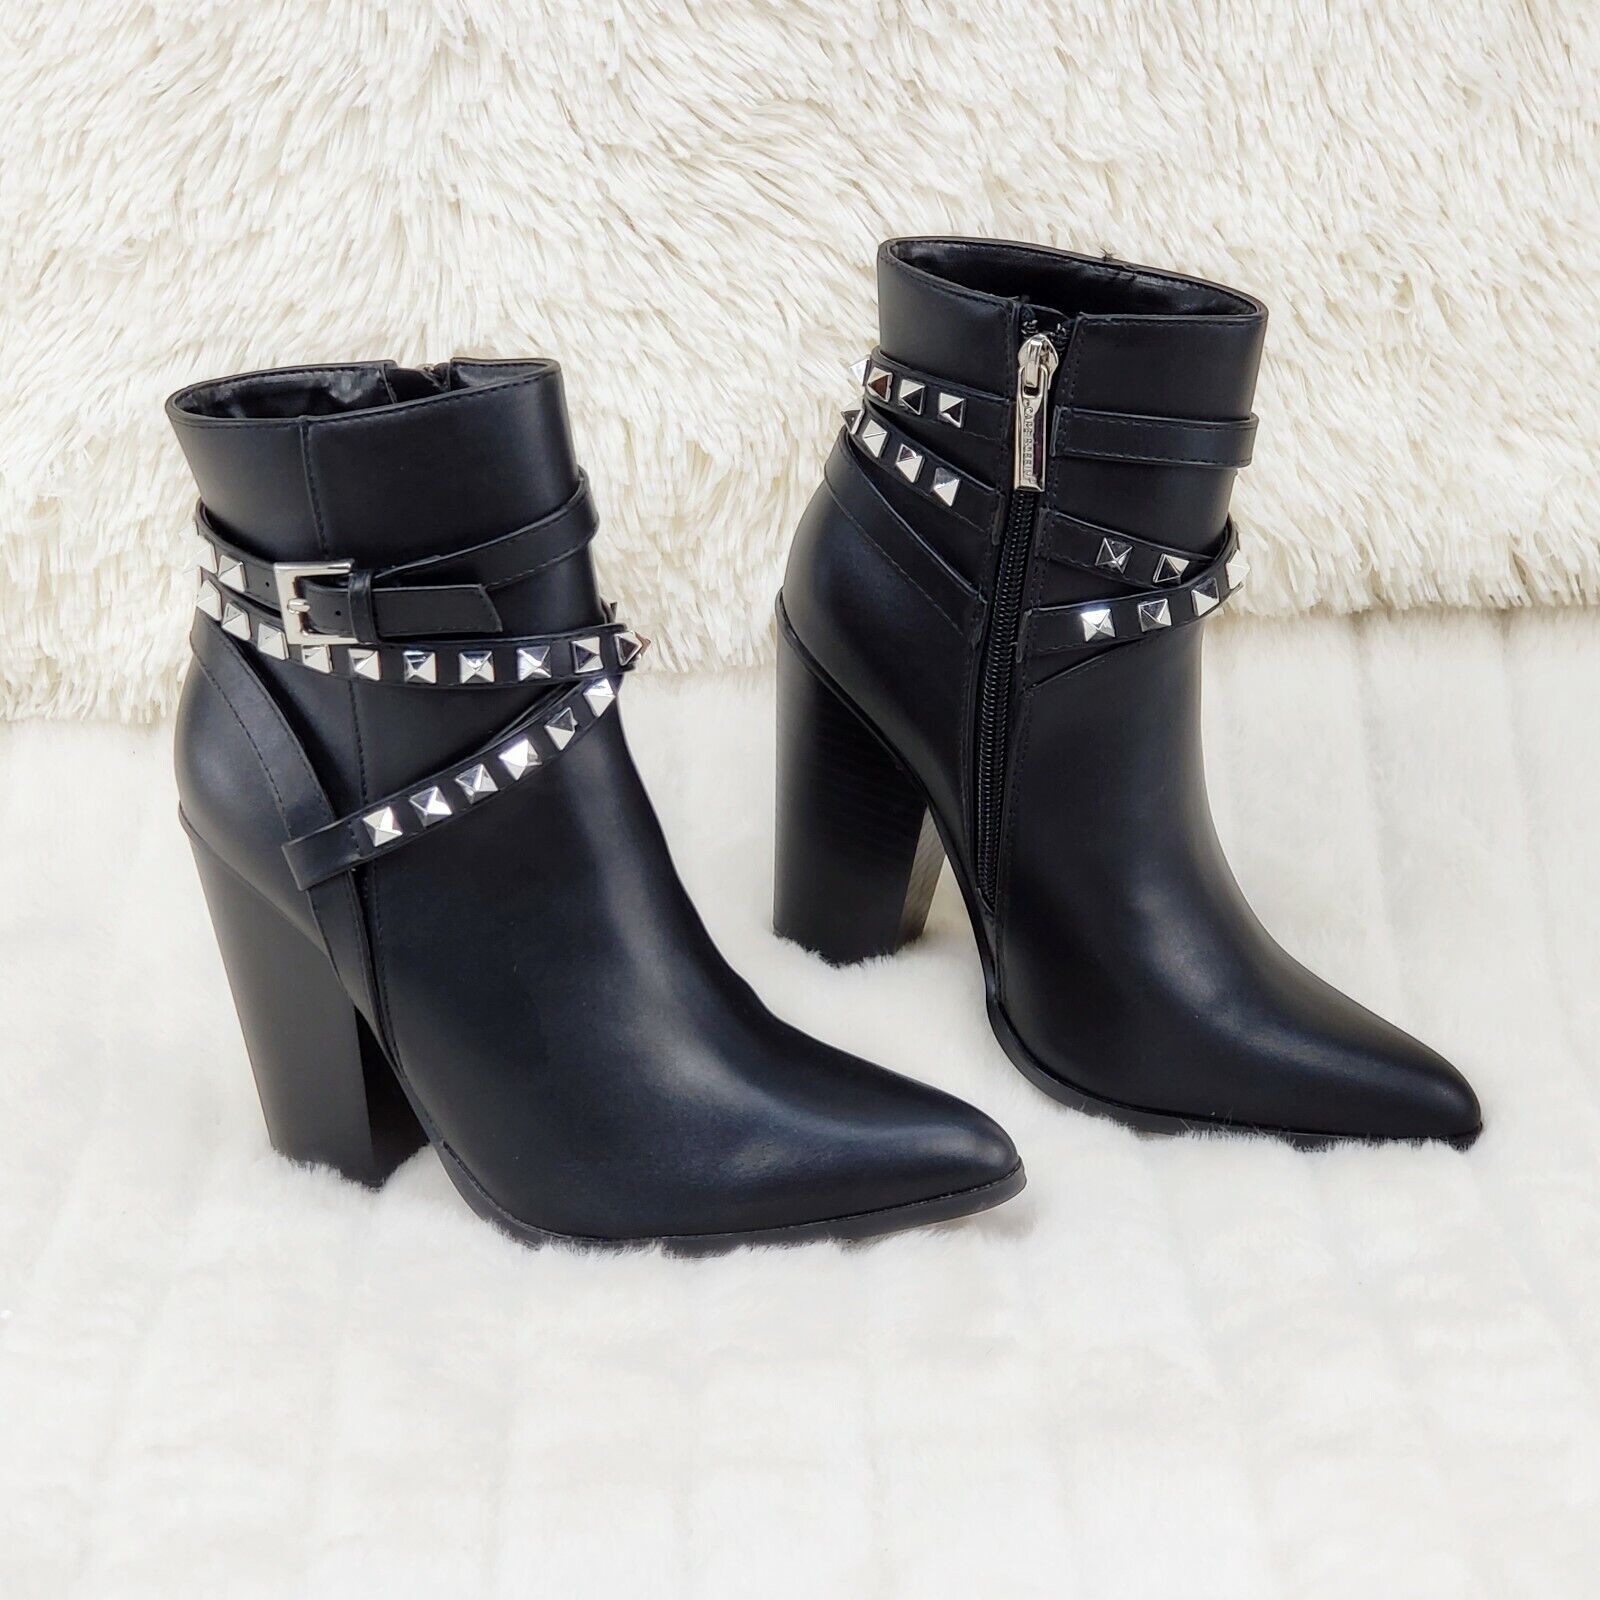 Classic Western Designer Cowboy Style Studded Strap Ankle Boot...